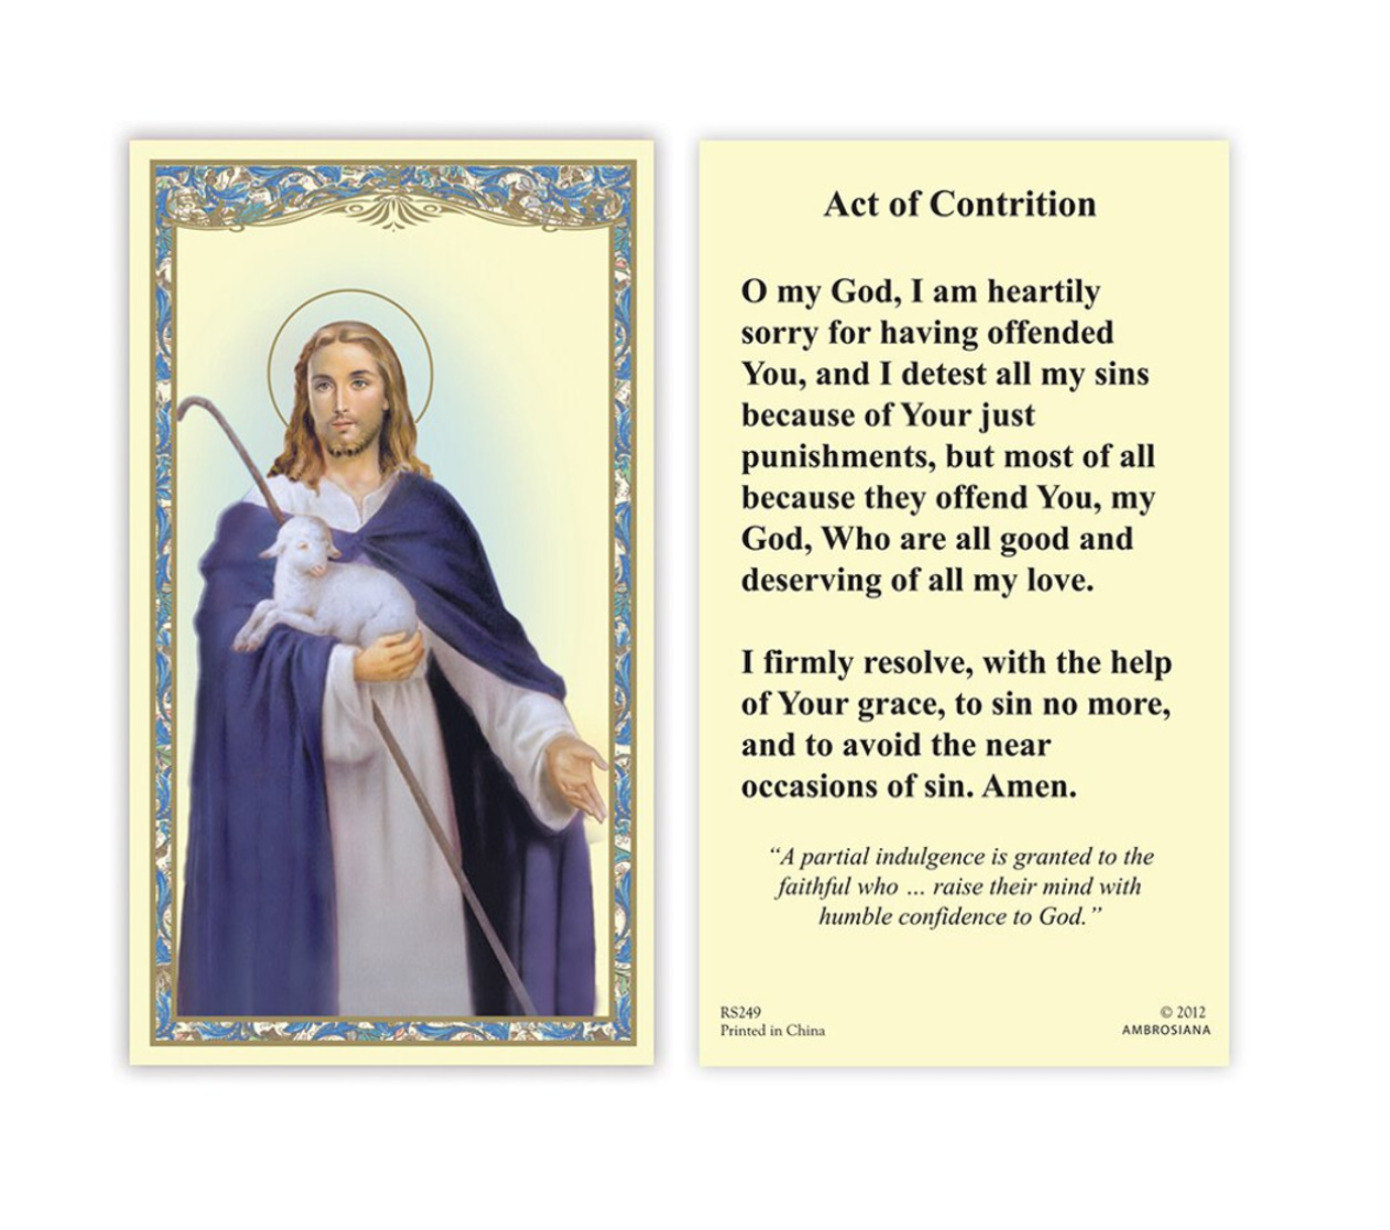 (2 copies) ACT OF CONTRITION Holy Prayer Card Reconciliation Catholic